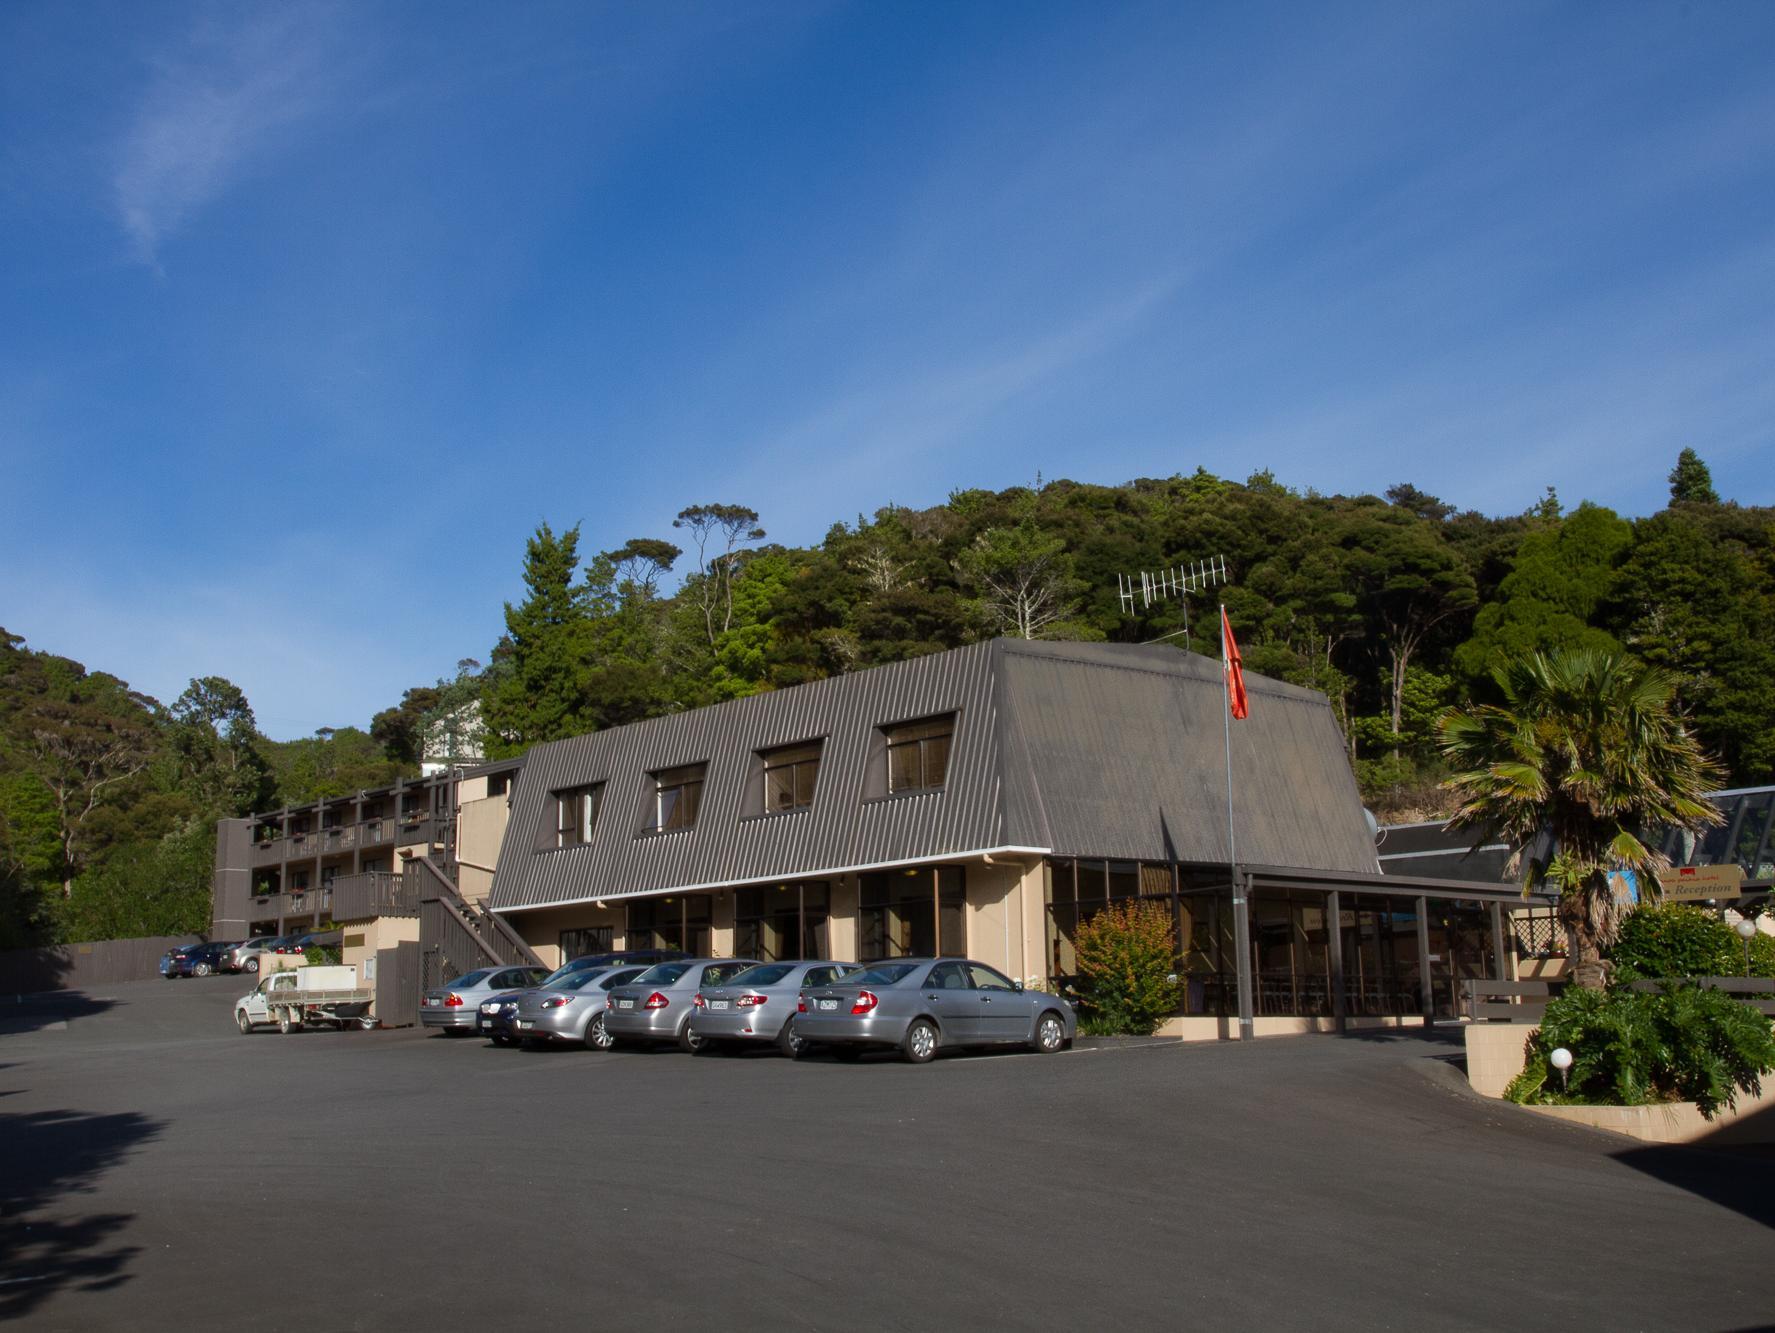 Tanoa Paihia Hotel New Zealand FAQ 2016, What facilities are there in Tanoa Paihia Hotel New Zealand 2016, What Languages Spoken are Supported in Tanoa Paihia Hotel New Zealand 2016, Which payment cards are accepted in Tanoa Paihia Hotel New Zealand , New Zealand Tanoa Paihia Hotel room facilities and services Q&A 2016, New Zealand Tanoa Paihia Hotel online booking services 2016, New Zealand Tanoa Paihia Hotel address 2016, New Zealand Tanoa Paihia Hotel telephone number 2016,New Zealand Tanoa Paihia Hotel map 2016, New Zealand Tanoa Paihia Hotel traffic guide 2016, how to go New Zealand Tanoa Paihia Hotel, New Zealand Tanoa Paihia Hotel booking online 2016, New Zealand Tanoa Paihia Hotel room types 2016.